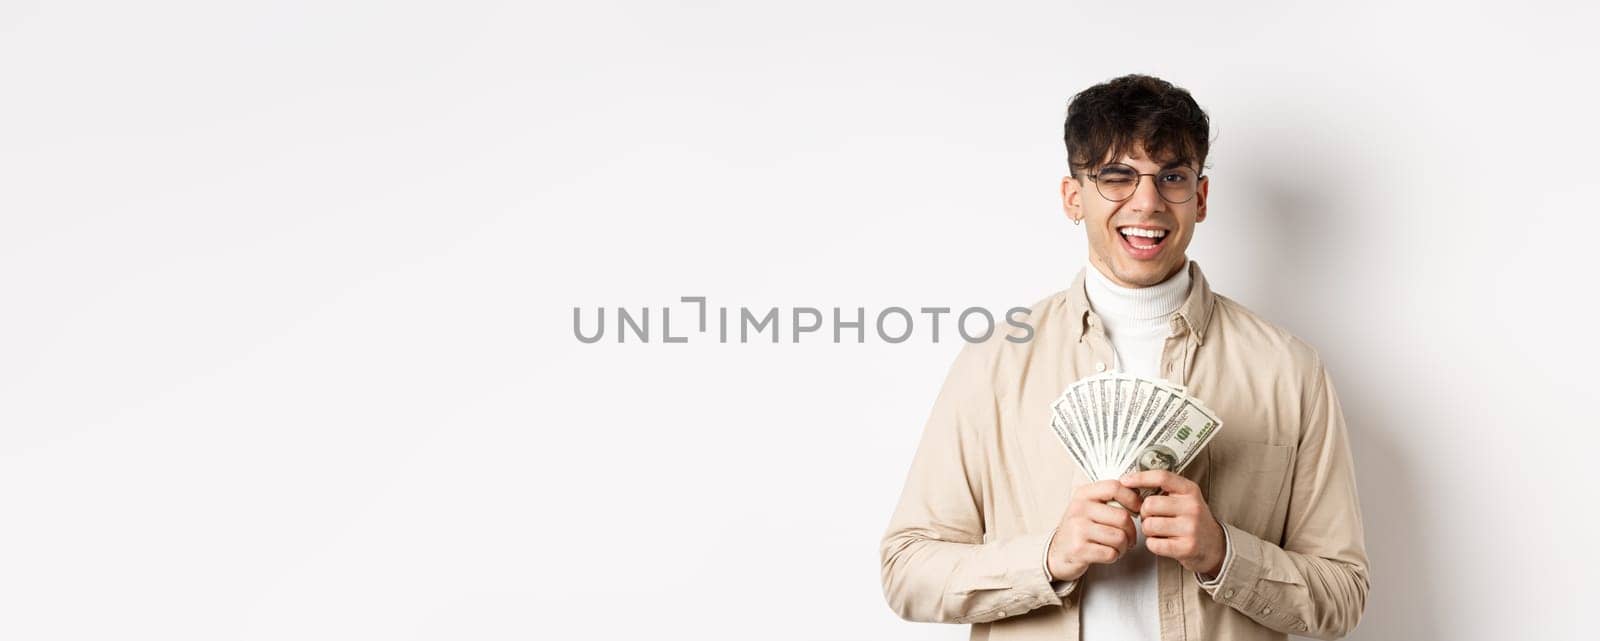 Handsome young man winking and showing dollar bills, holding fan of money banknotes and smiling pleased, making money, standing on white background.